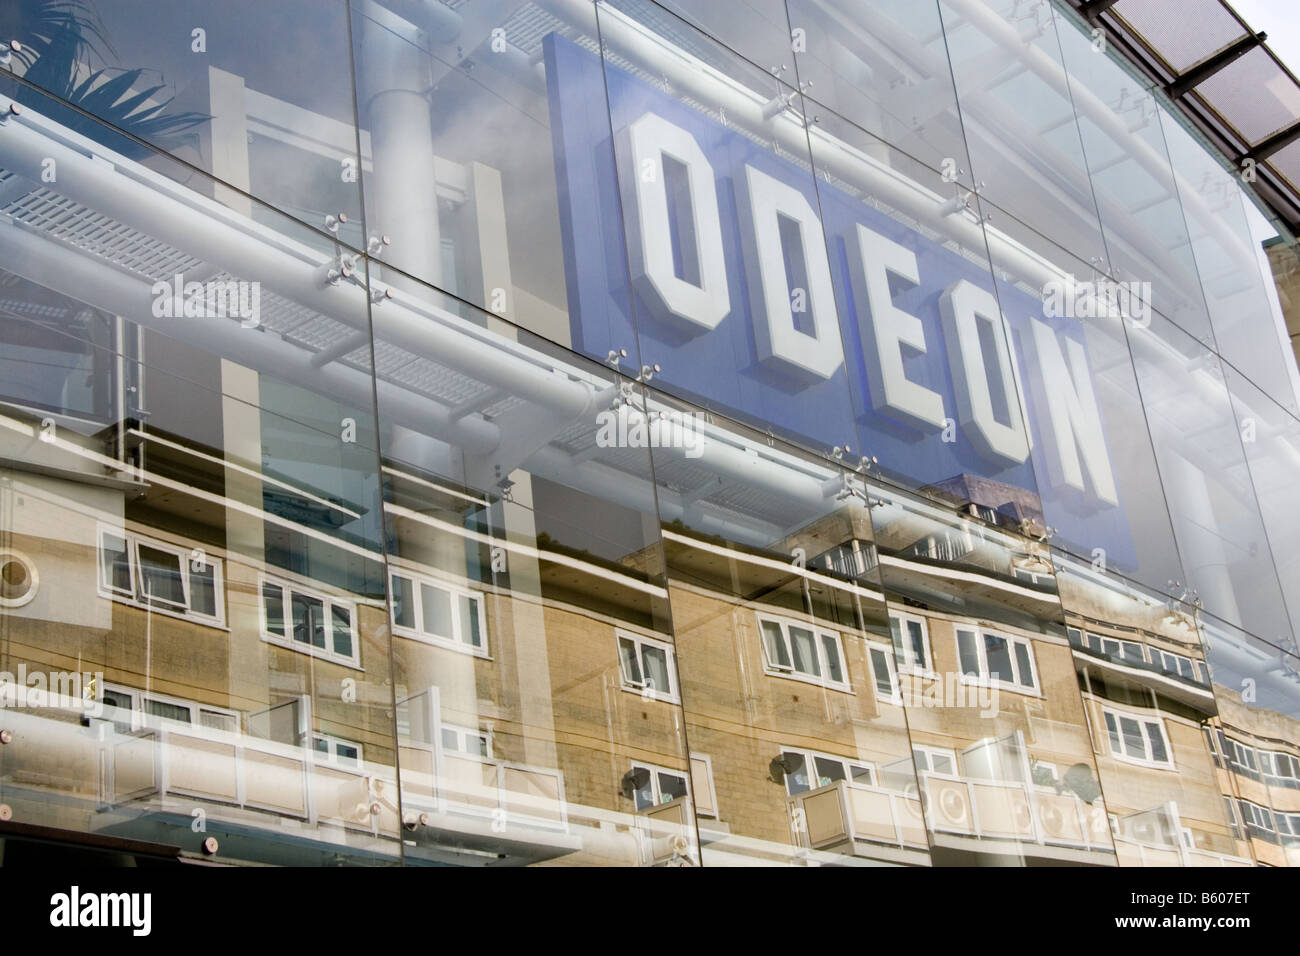 The glass frontage of the Odeon cinema complex in Bath, England with distorted reflections of nearby housing Stock Photo